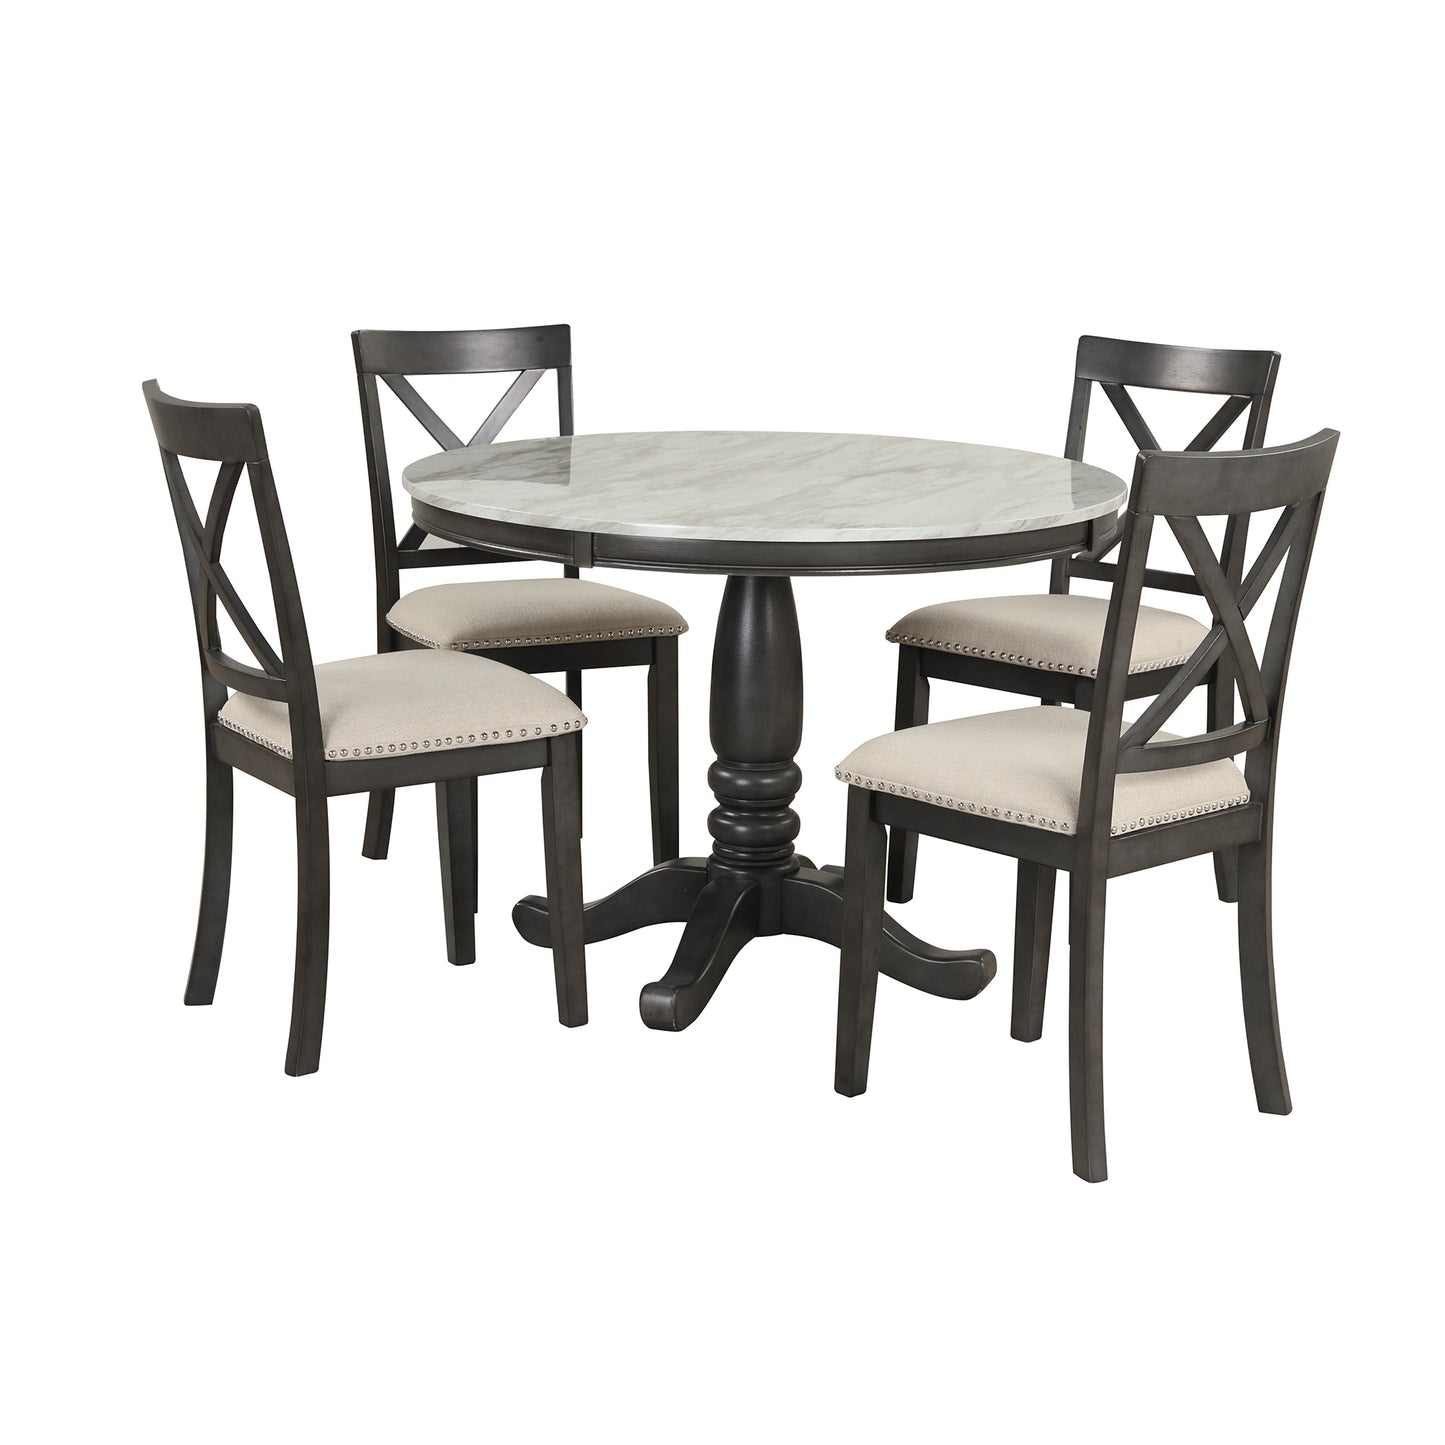 Orisfur 5 Pieces Dining Table and Chairs Set for 4 Persons